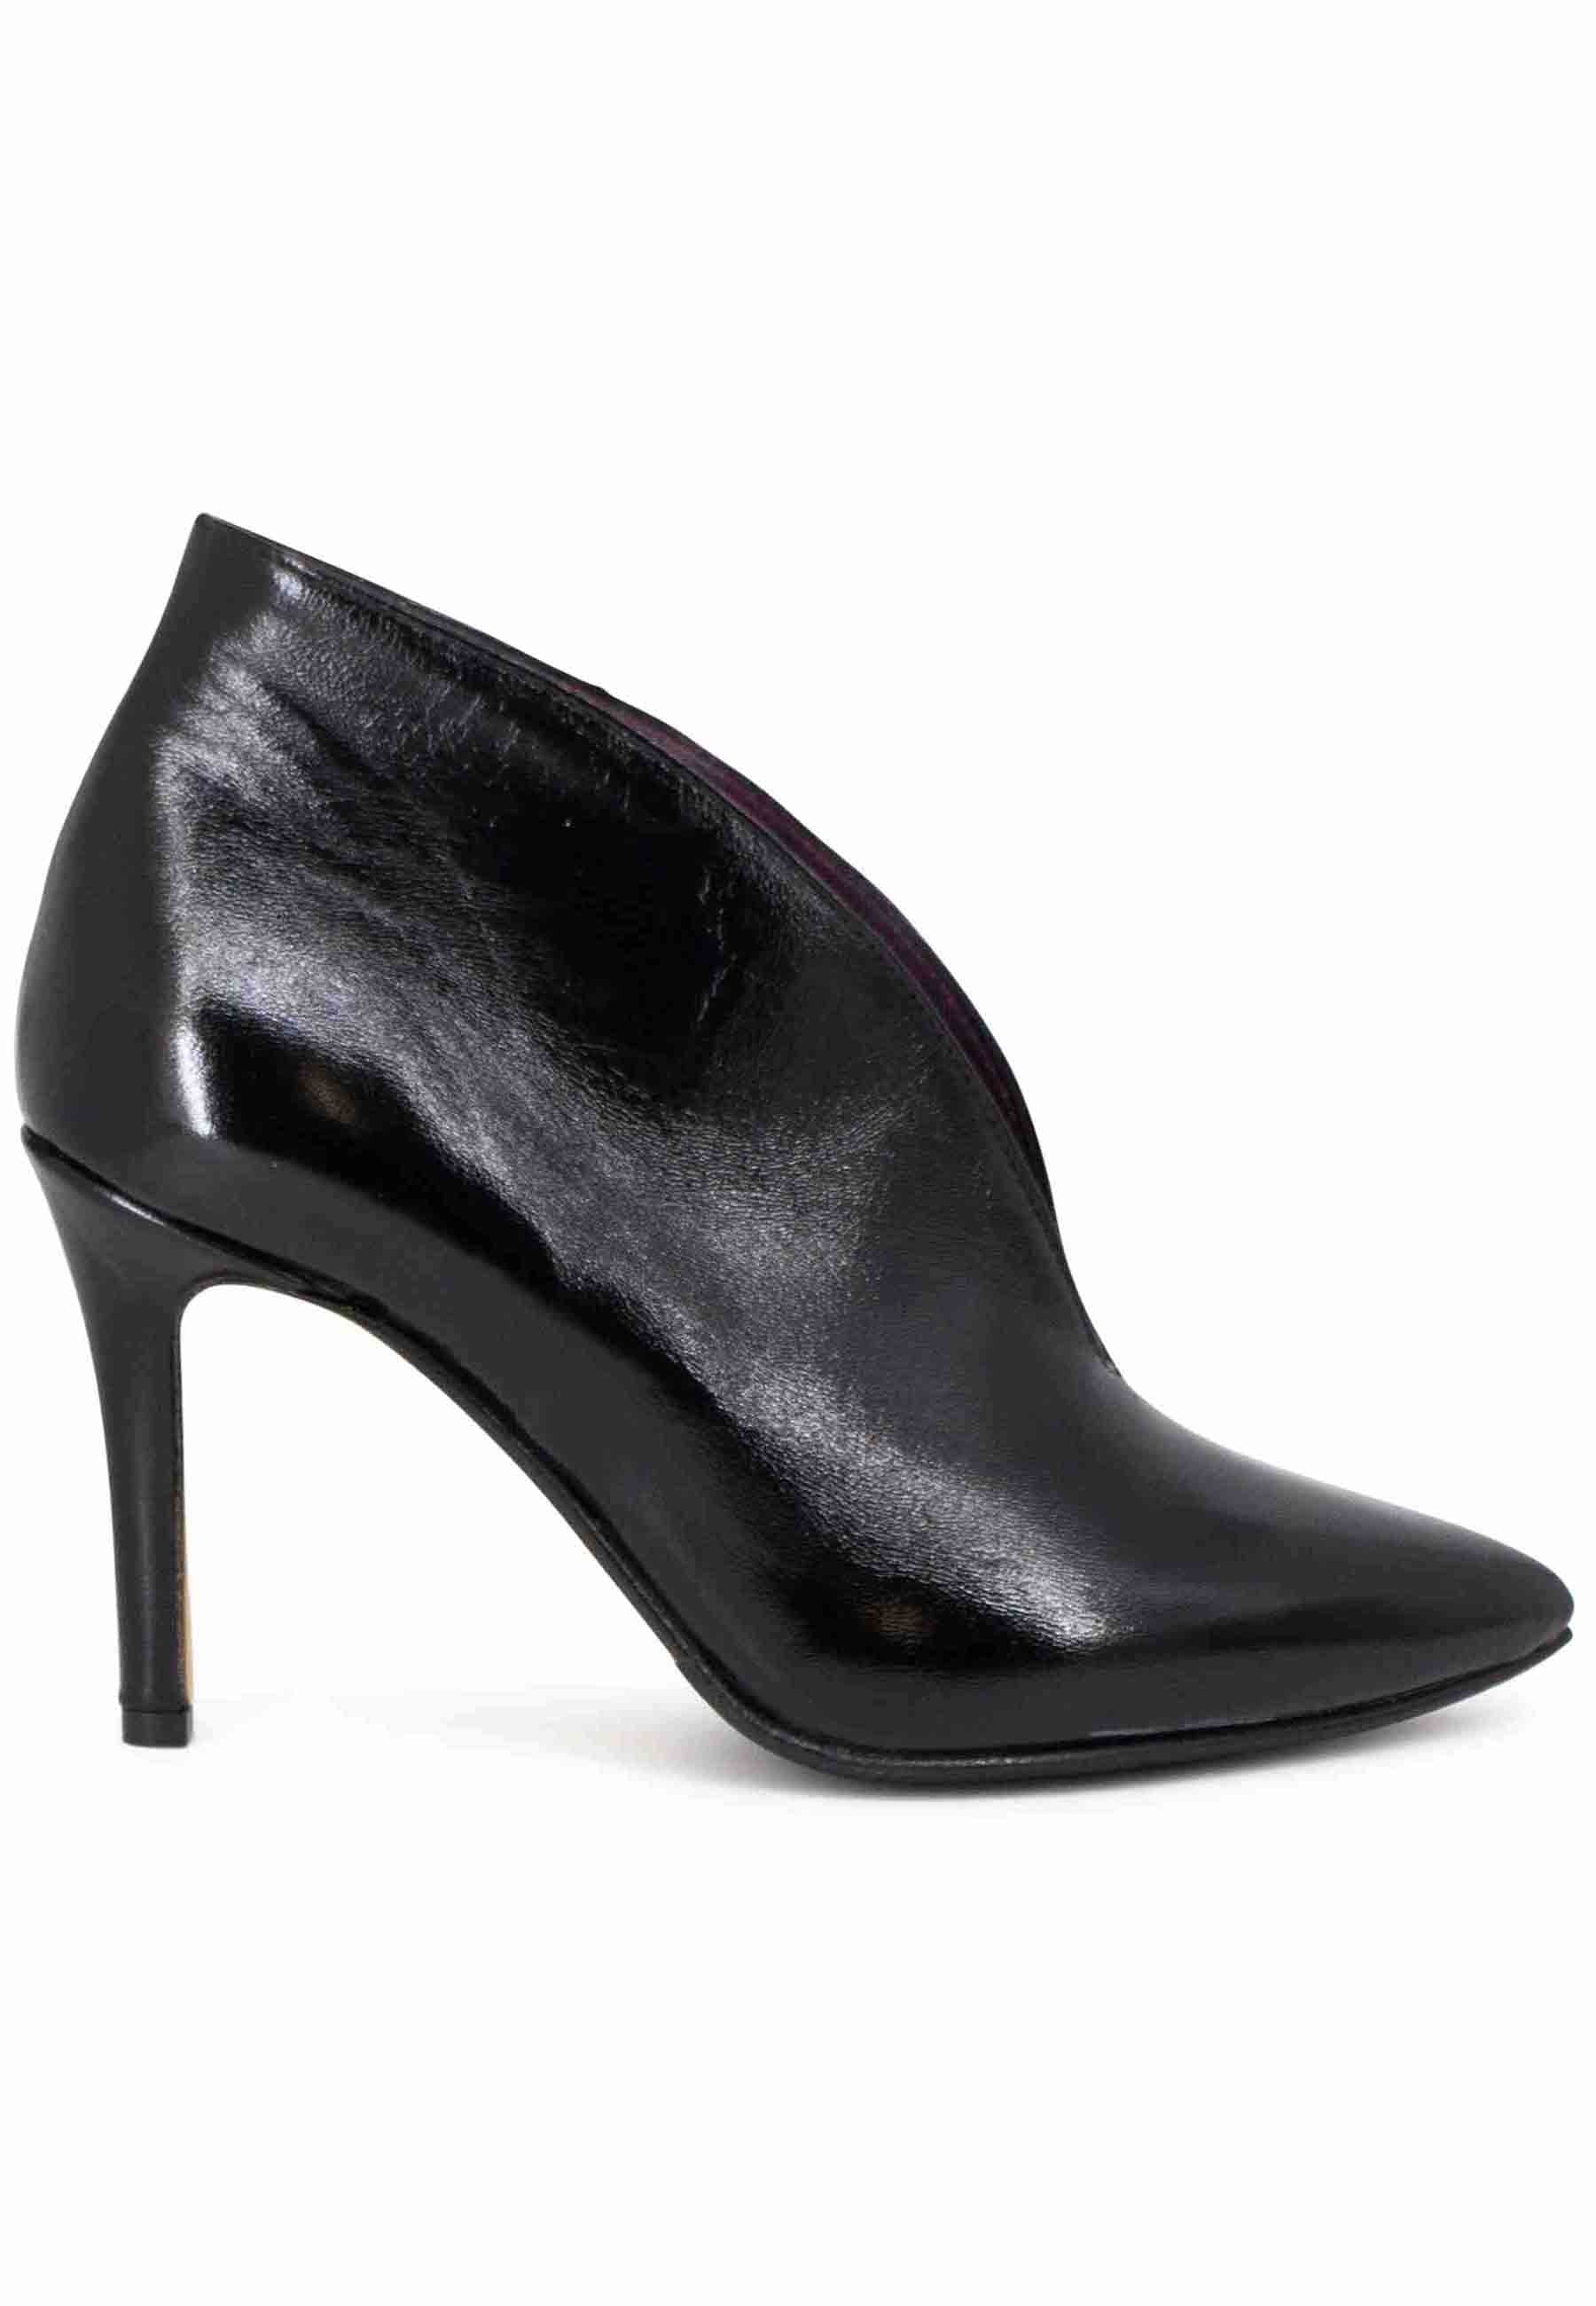 Women's high heel black leather ankle boots